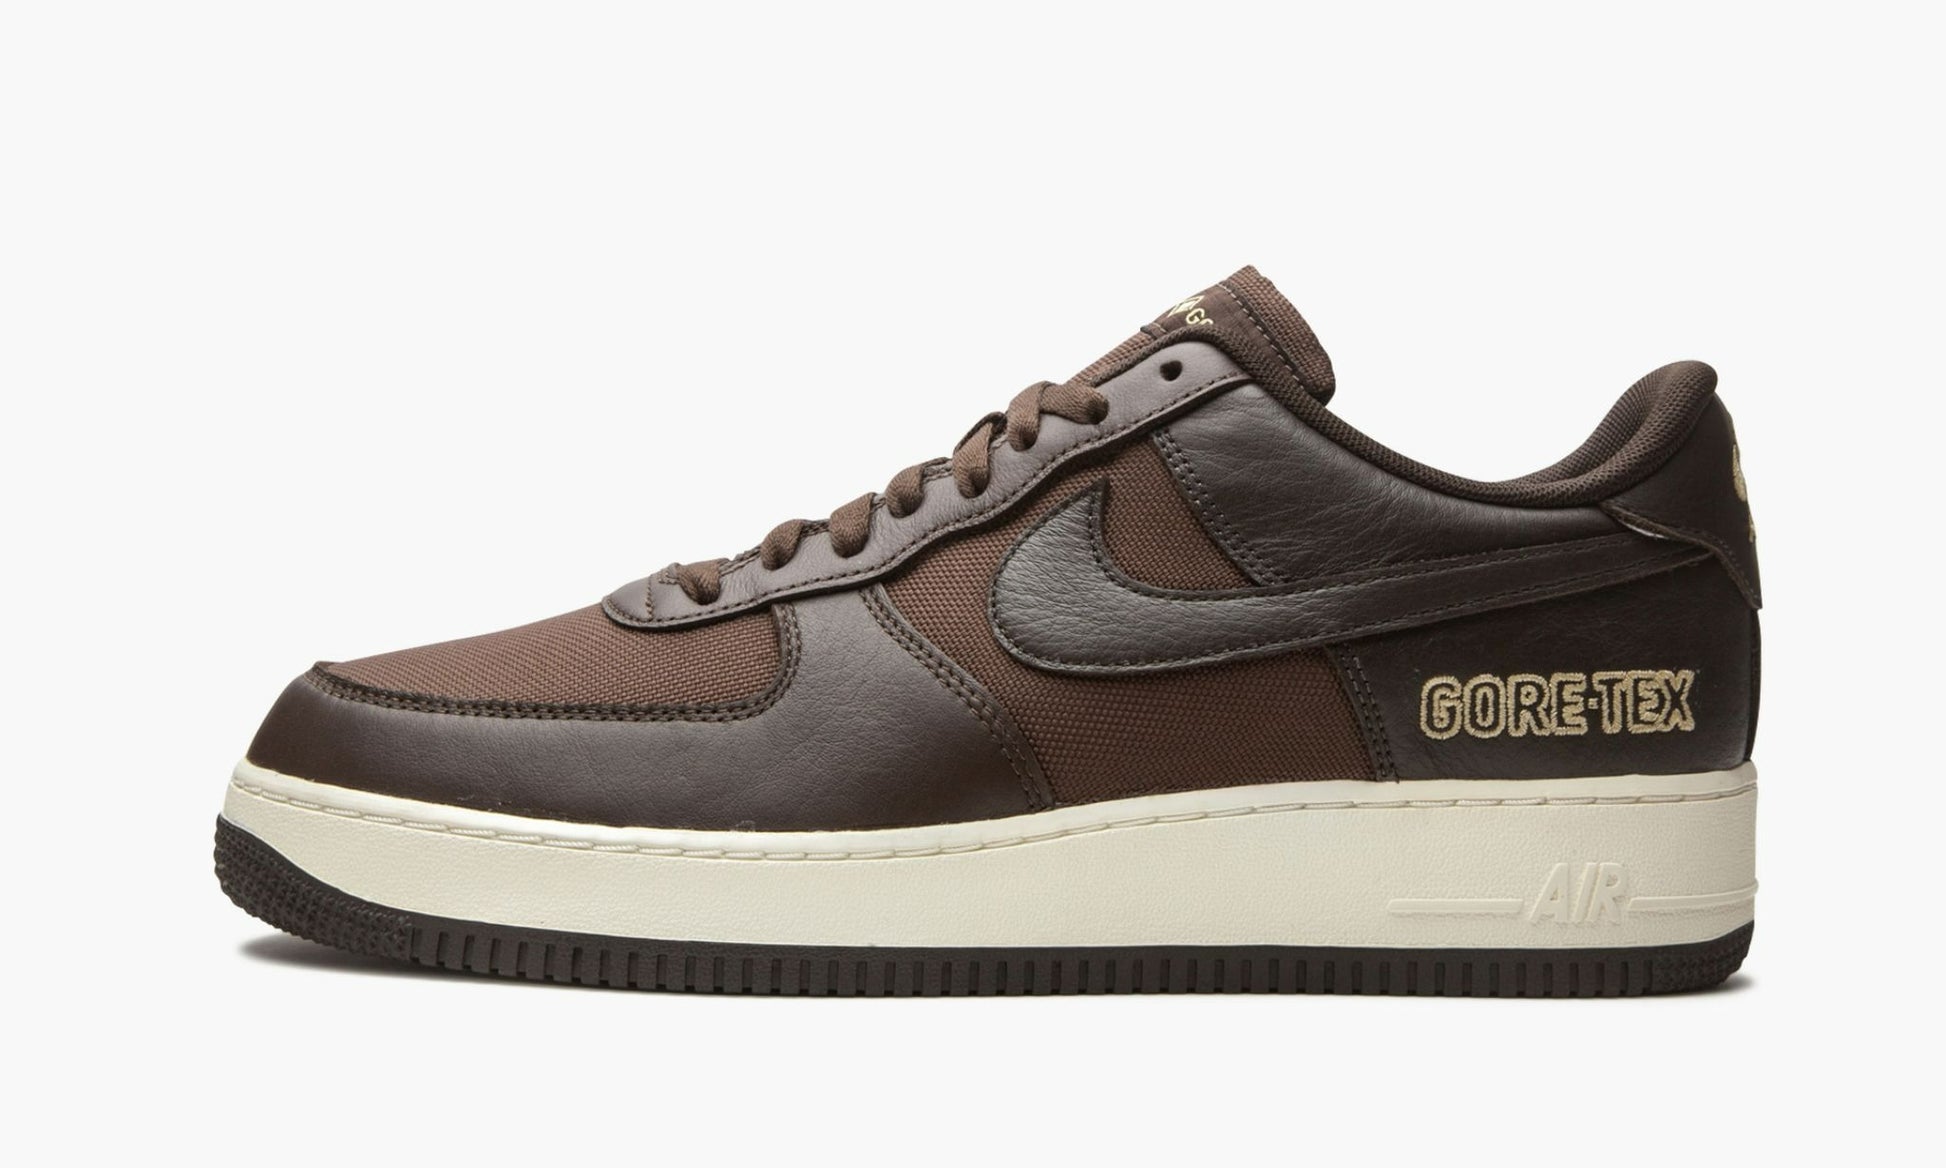 Air Force 1 Low Gore-Tex Baroque Brown - CT2858 201 | The Sortage